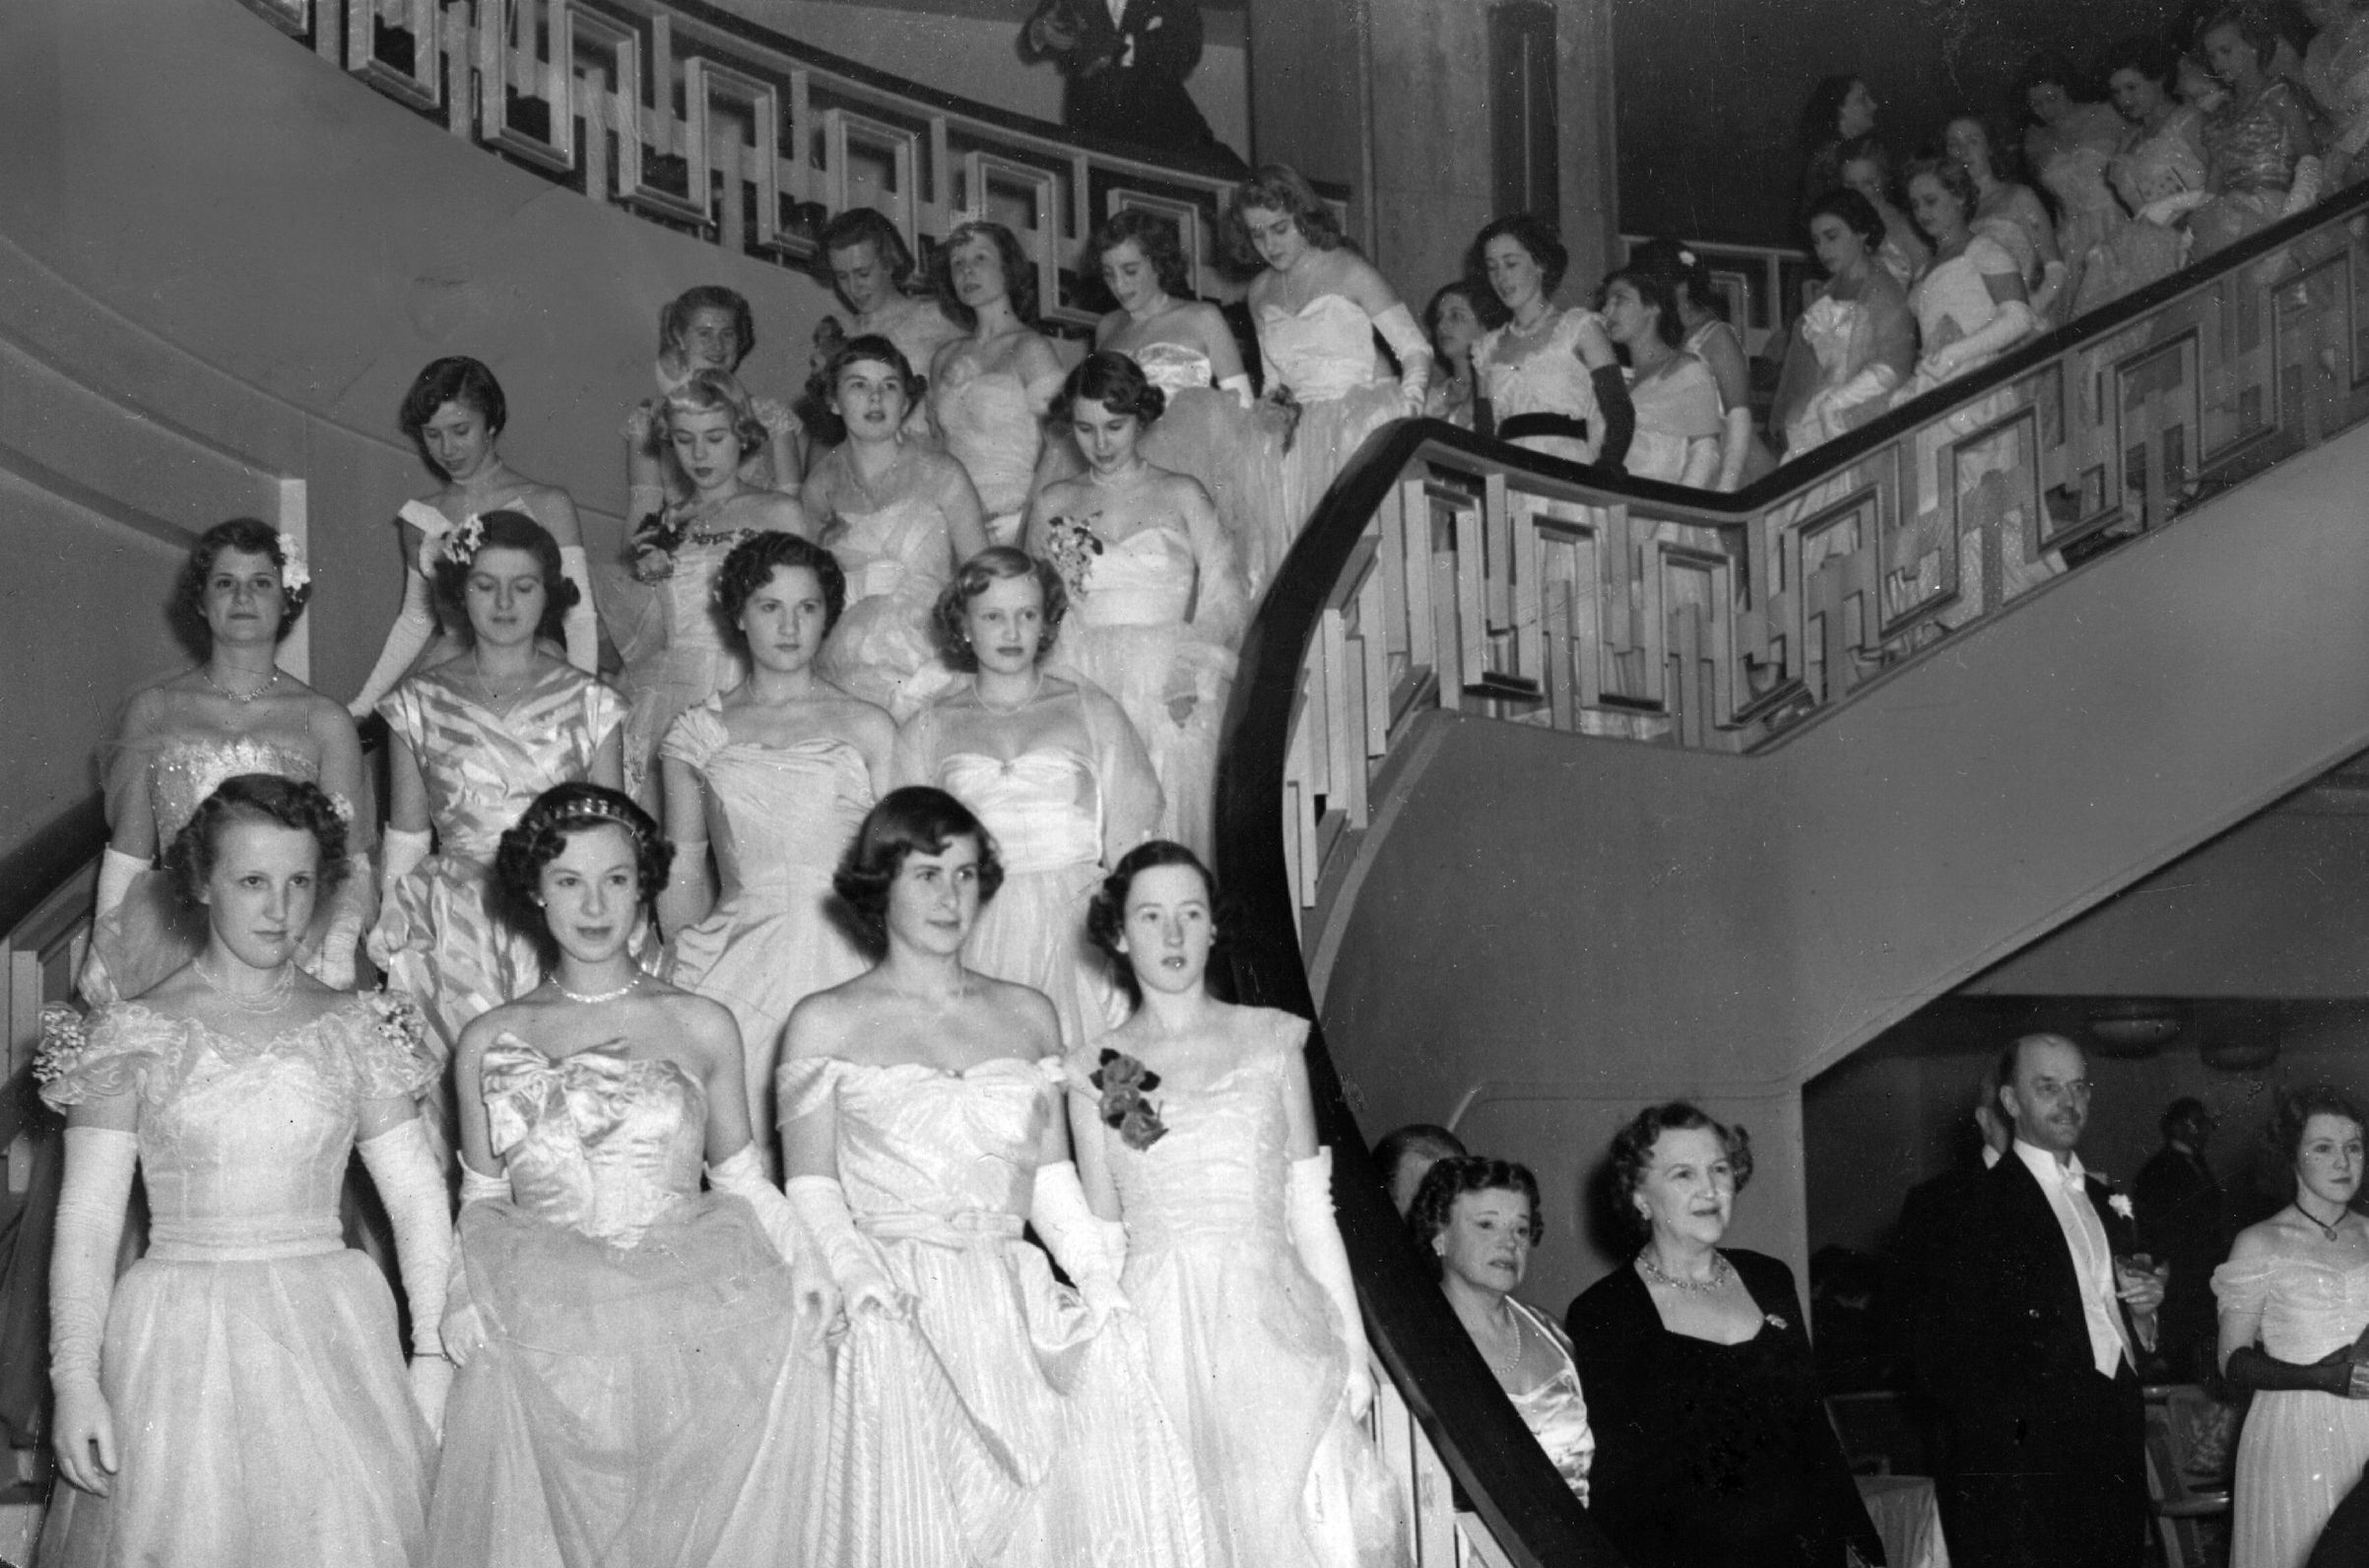 May 19, 1950:  The massed ranks of debutantes at the Queen Charlotte's Ball at Grosvenor House descend into the ballroom. (Keystone/Getty Images)